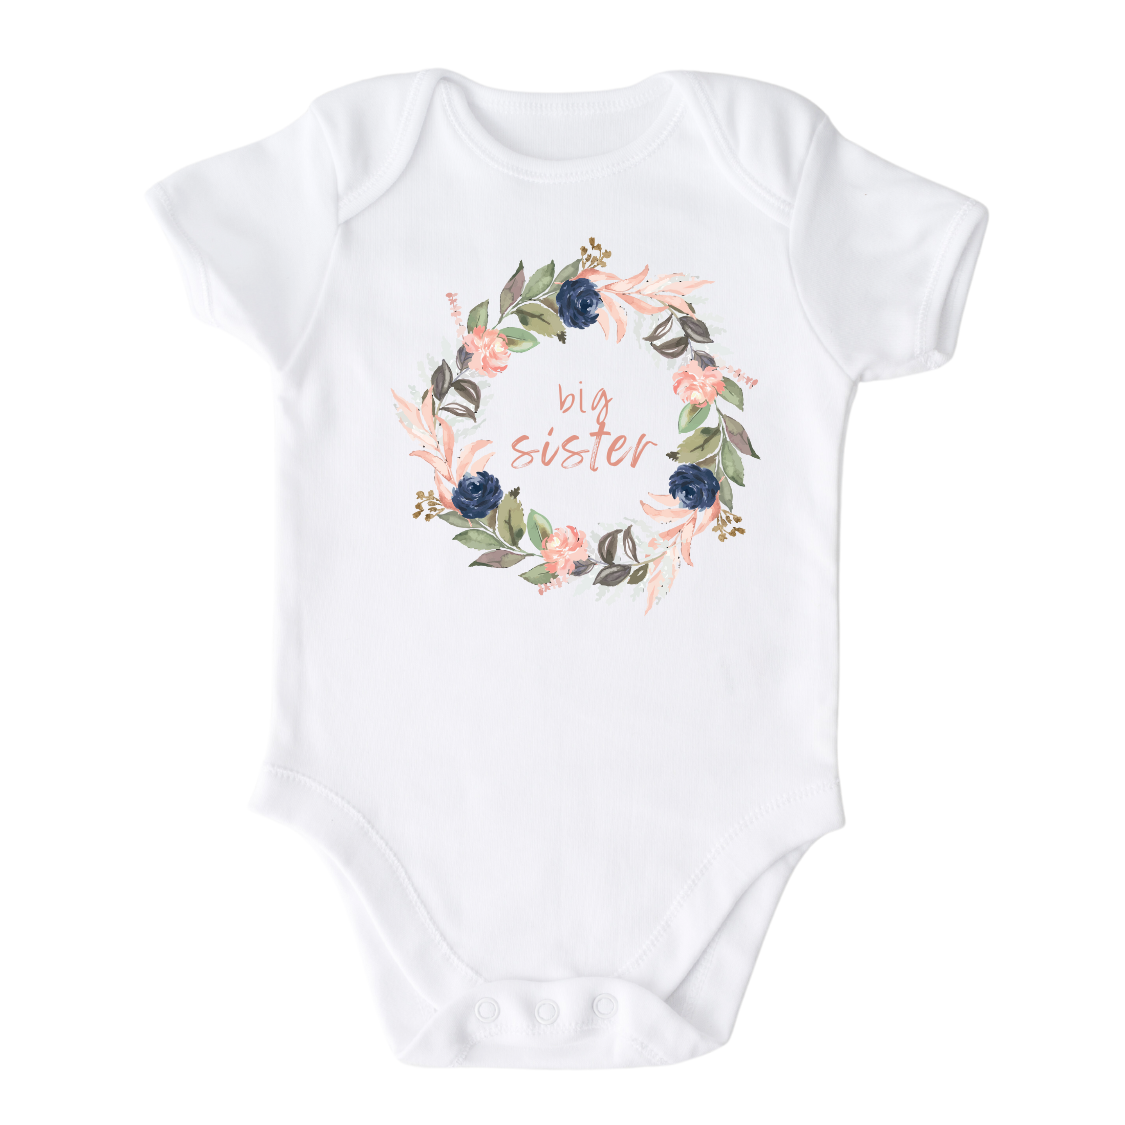 Baby Bodysuit with a cute printed graphic of a floral wreath and the text 'Big Sister.' This adorable t-shirt celebrates the special role of being a big sister. Made with high-quality materials, it offers comfort and durability, making it a perfect addition to any child's wardrobe.